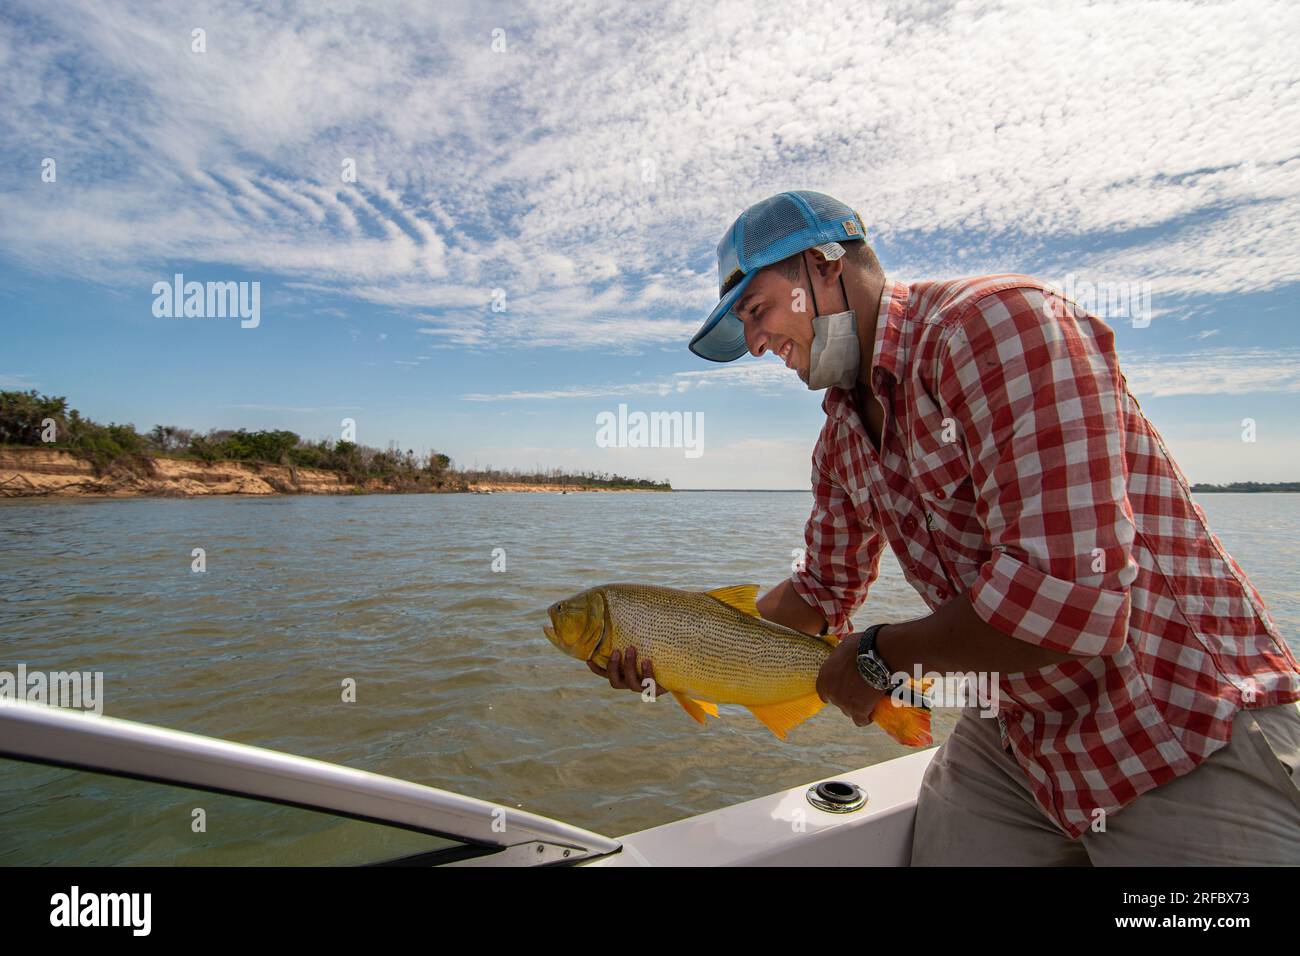 Fisherman holding a golden dorado (Salminus Brasiliensis) during a catch and return demo on a fishing day. Stock Photo